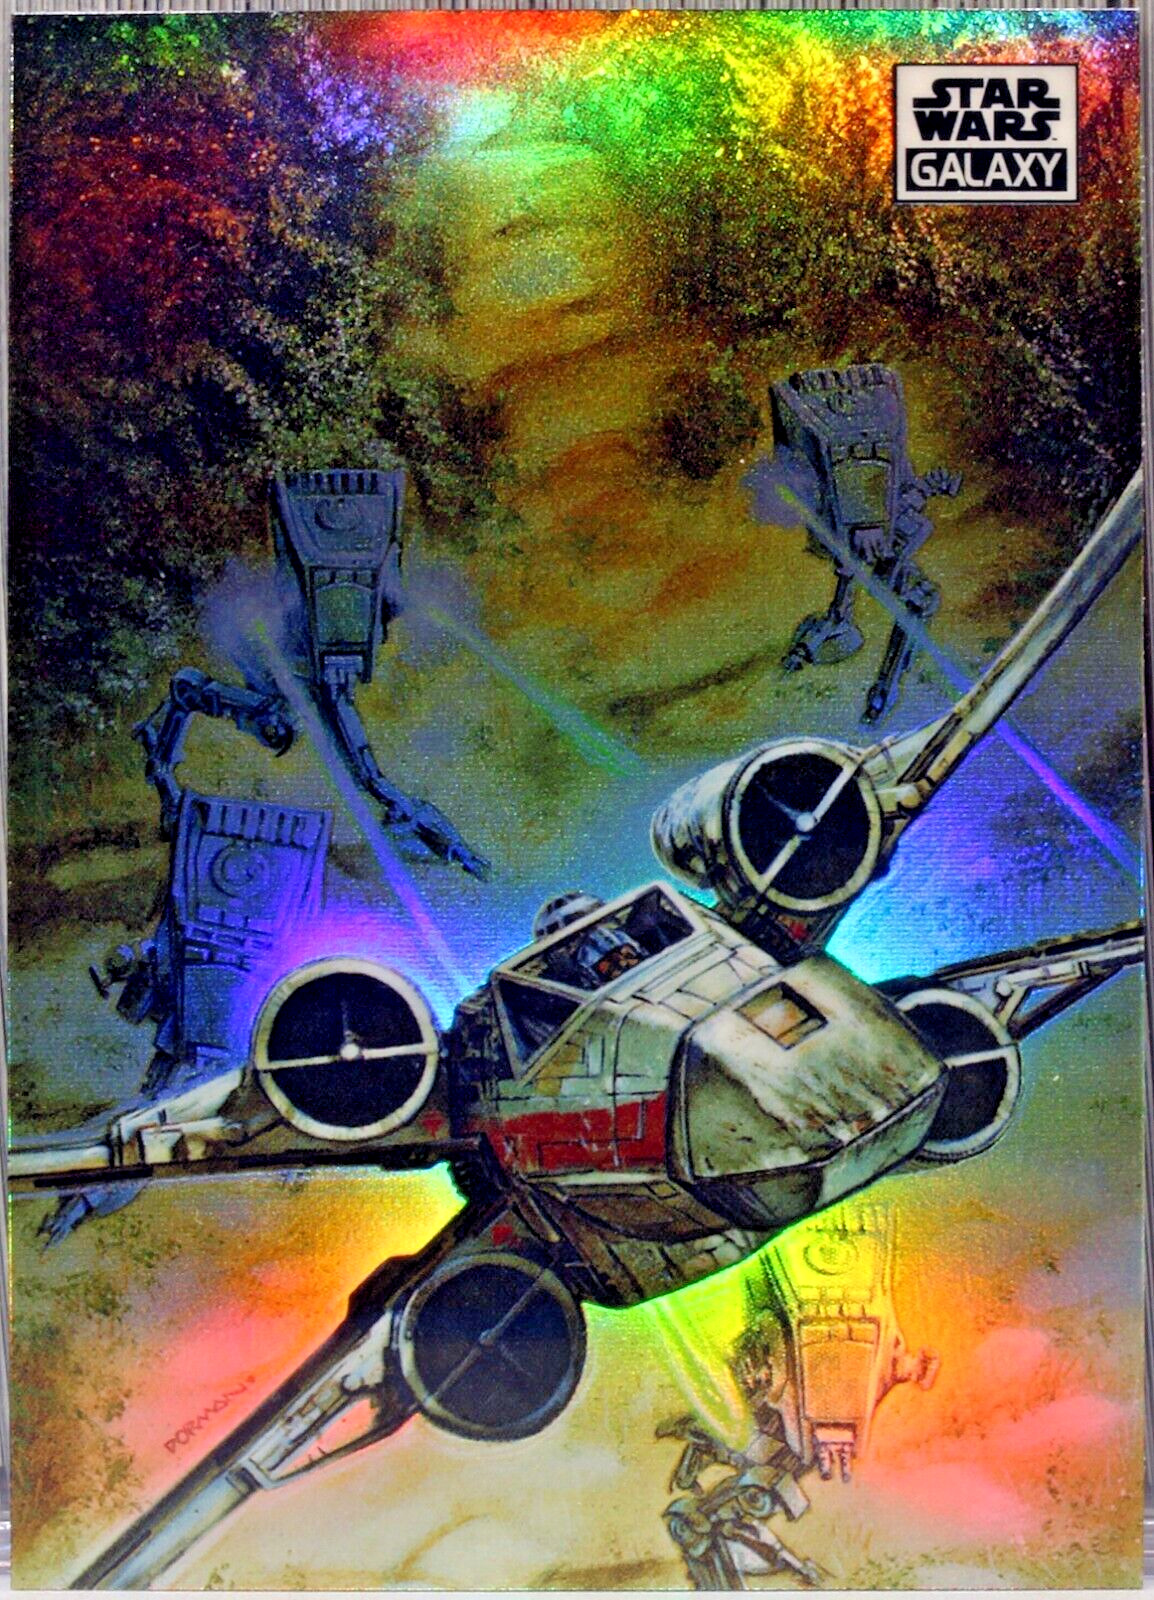 2021 Topps Star Wars Chrome Galaxy Escaping the AT-ST's #31 Refractor